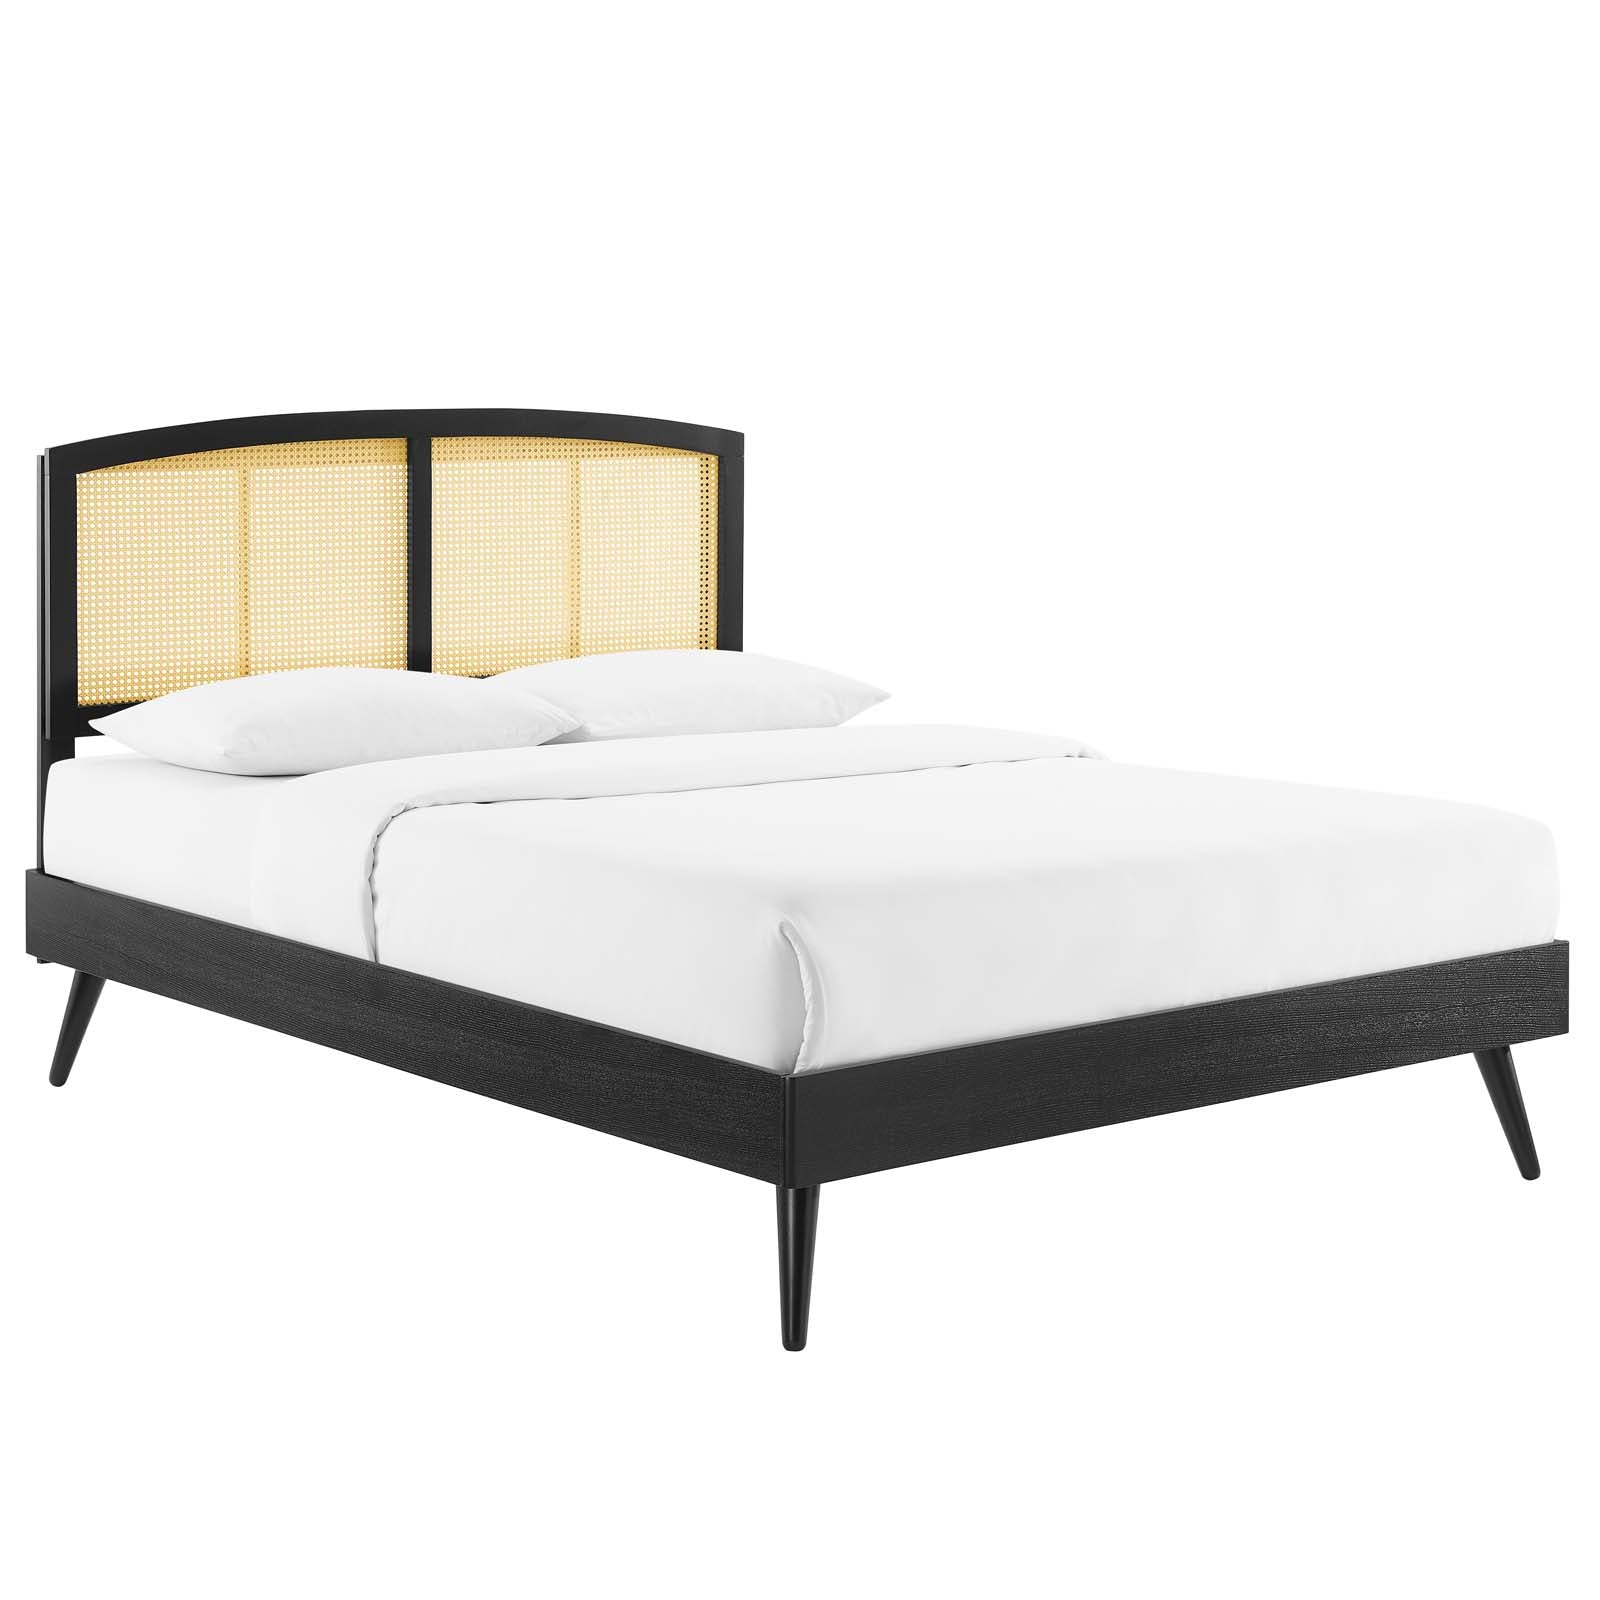 Modway Beds - Sierra-Cane-and-Wood-Full-Platform-Bed-With-Splayed-Legs-Black